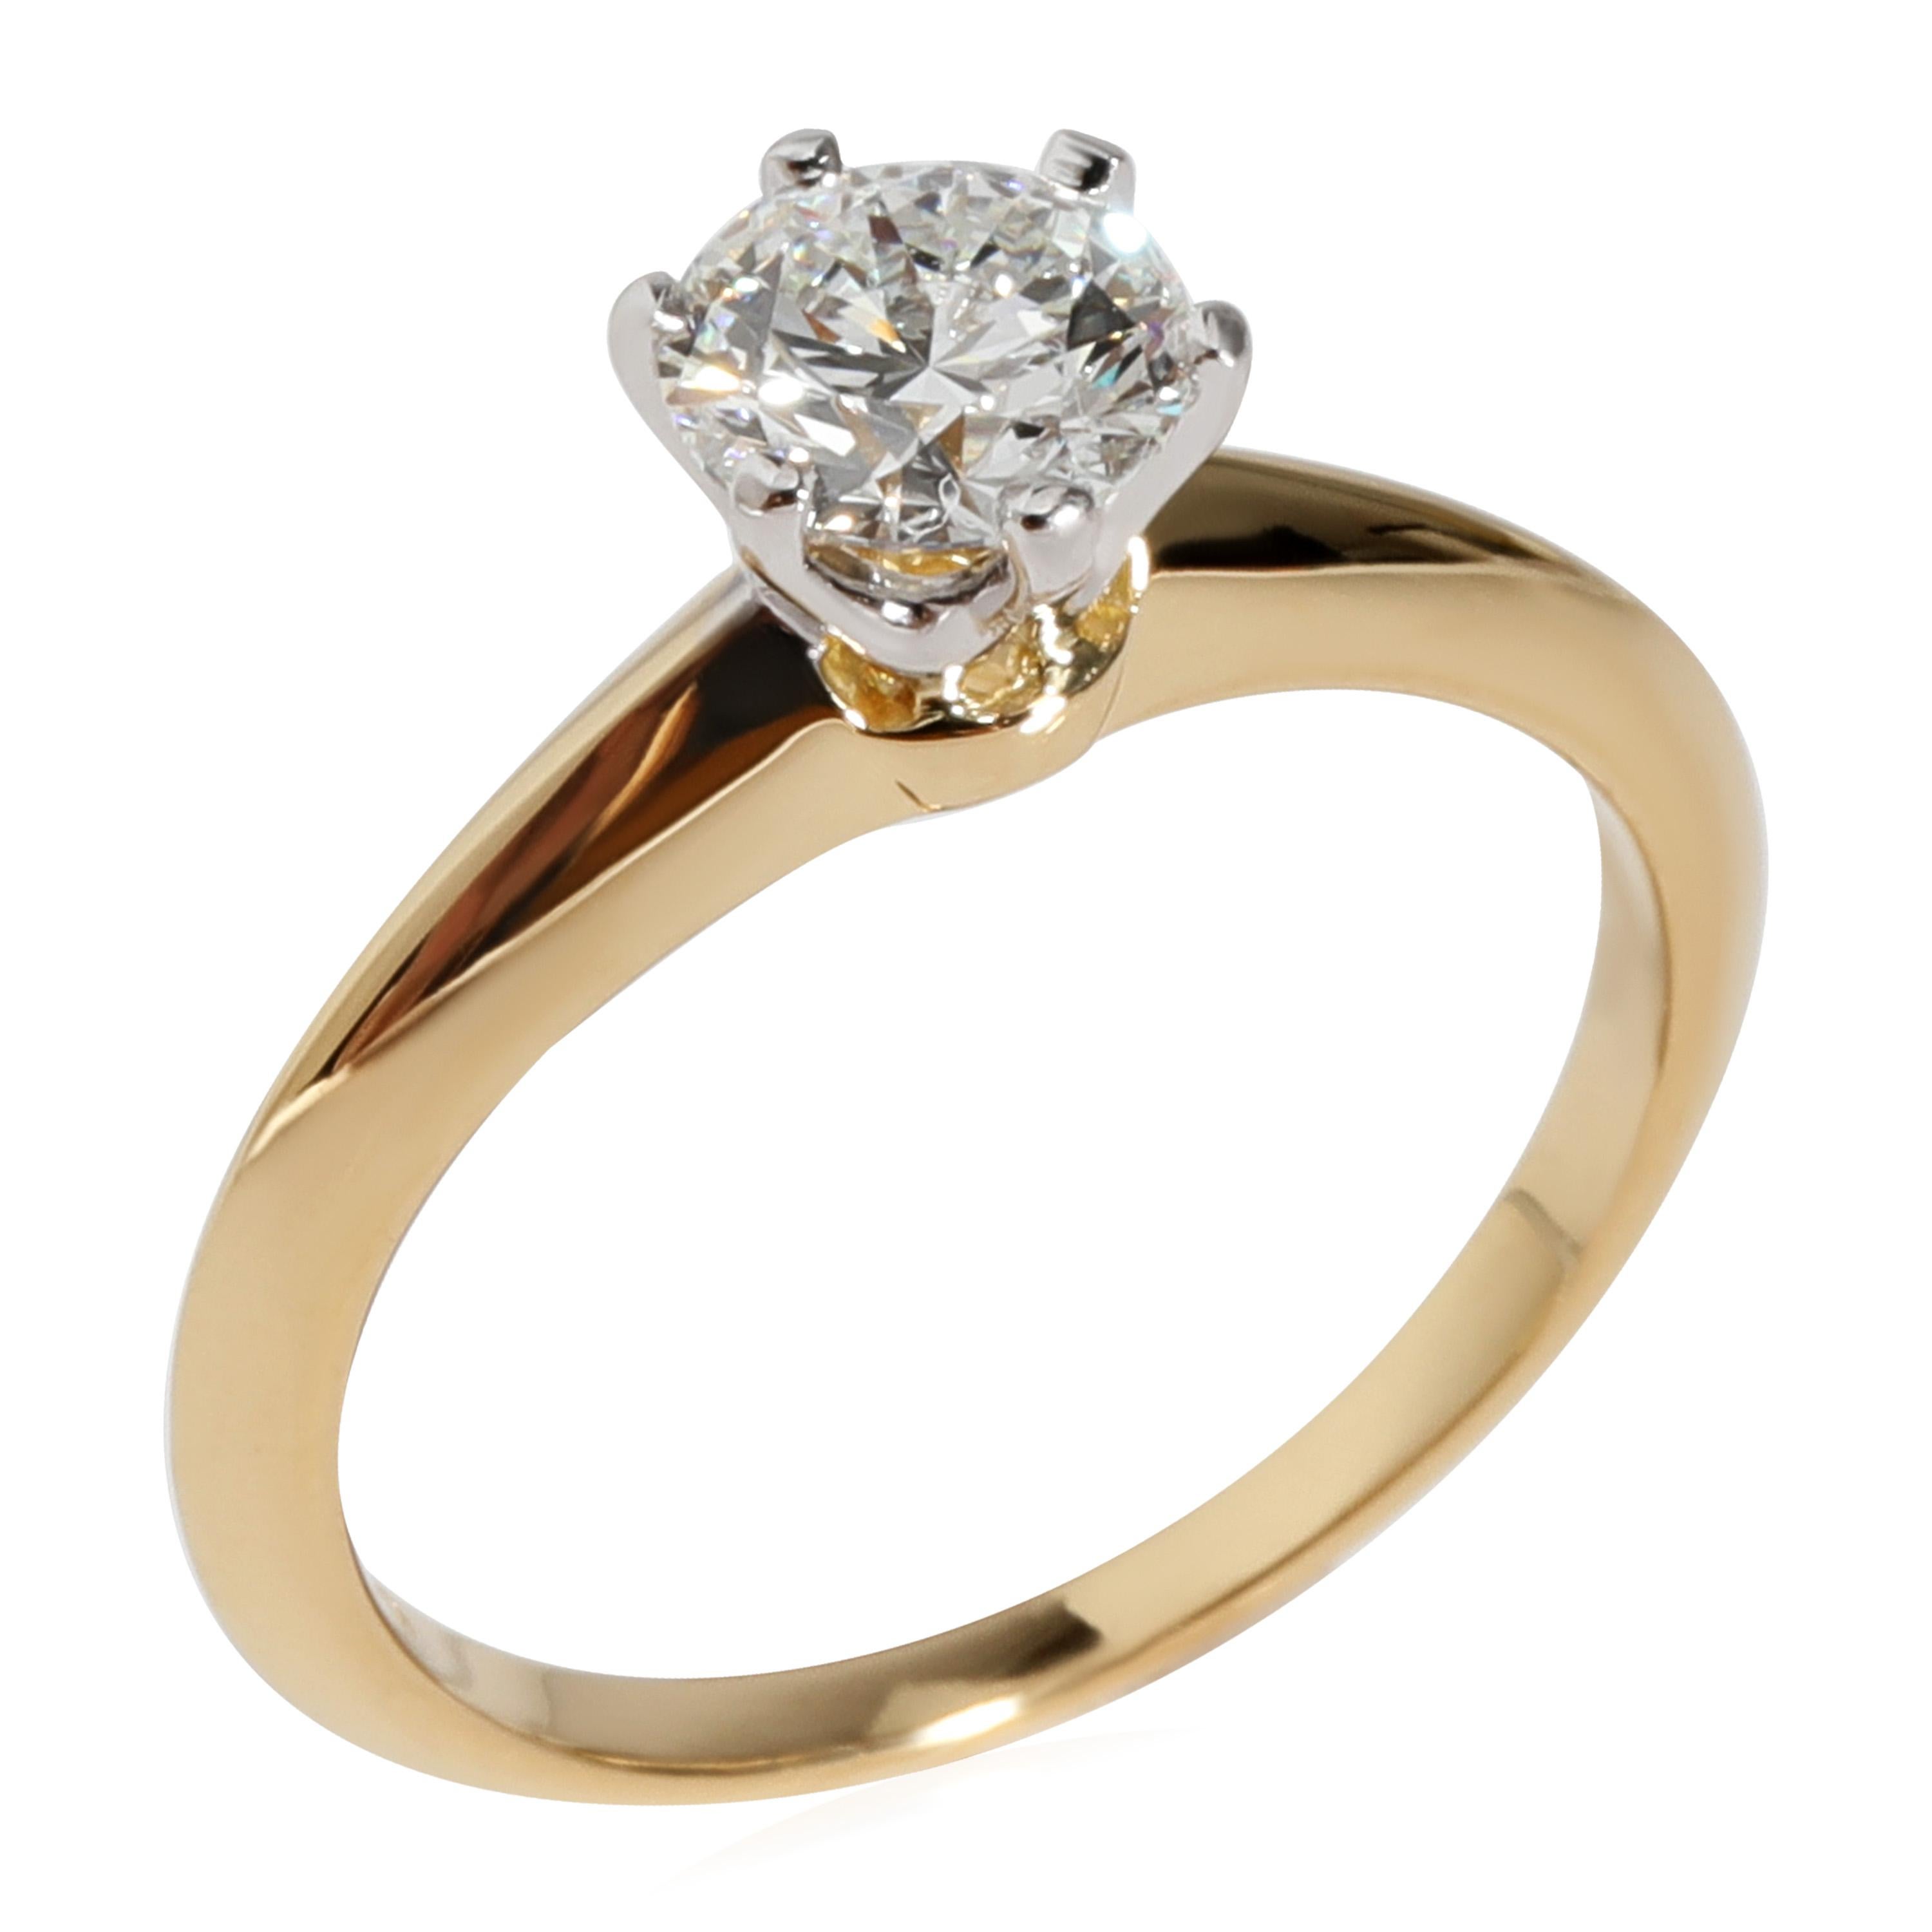 Tiffany & Co. Solitaire Ring in 18k Yellow Gold/Platinum 0.61 CTW

PRIMARY DETAILS
SKU: 122480
Listing Title: Tiffany & Co. Solitaire Ring in 18k Yellow Gold/Platinum 0.61 CTW
Condition Description: Retails for 7600 USD. In excellent condition and